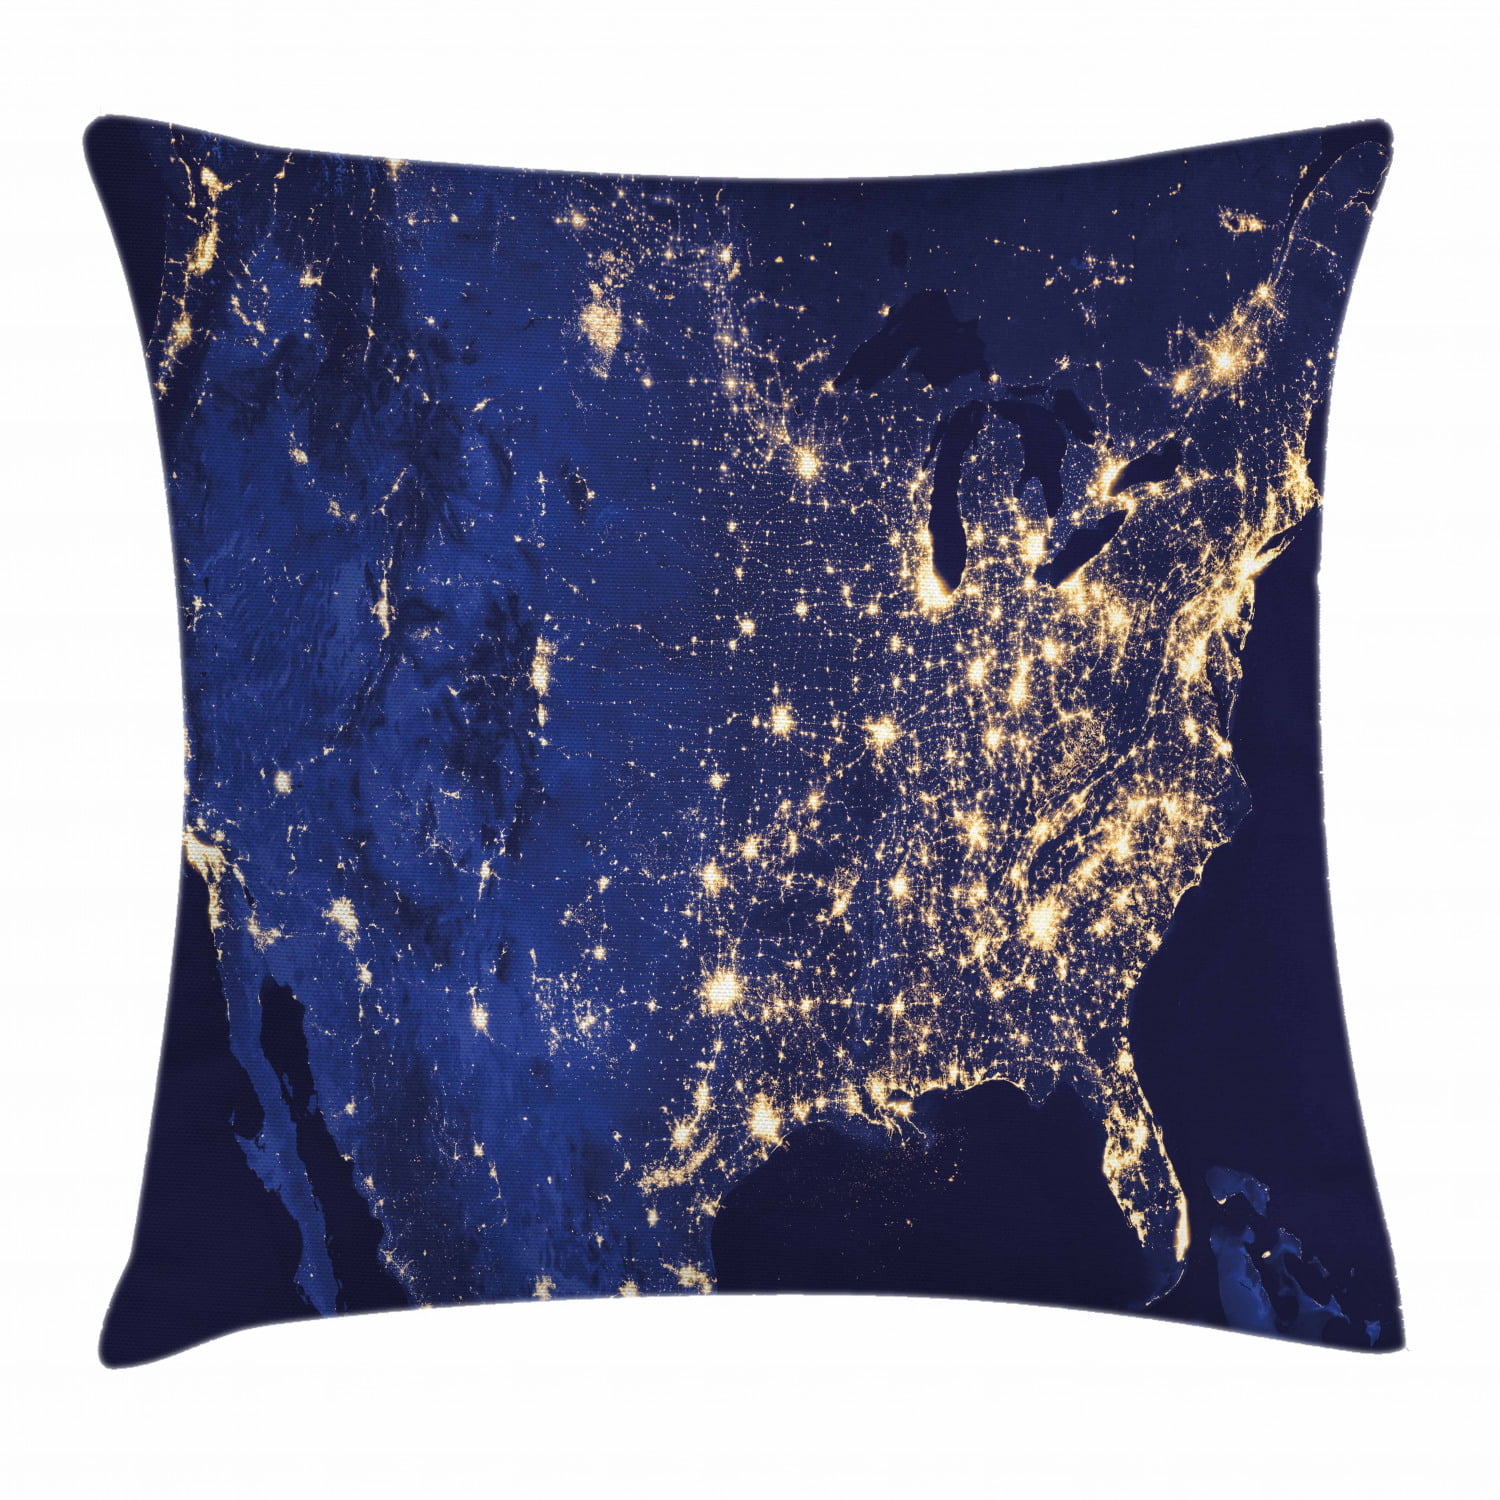 18x18 Multicolor Universe Starry Night Red Sky Stars Lovers Throw Pillow